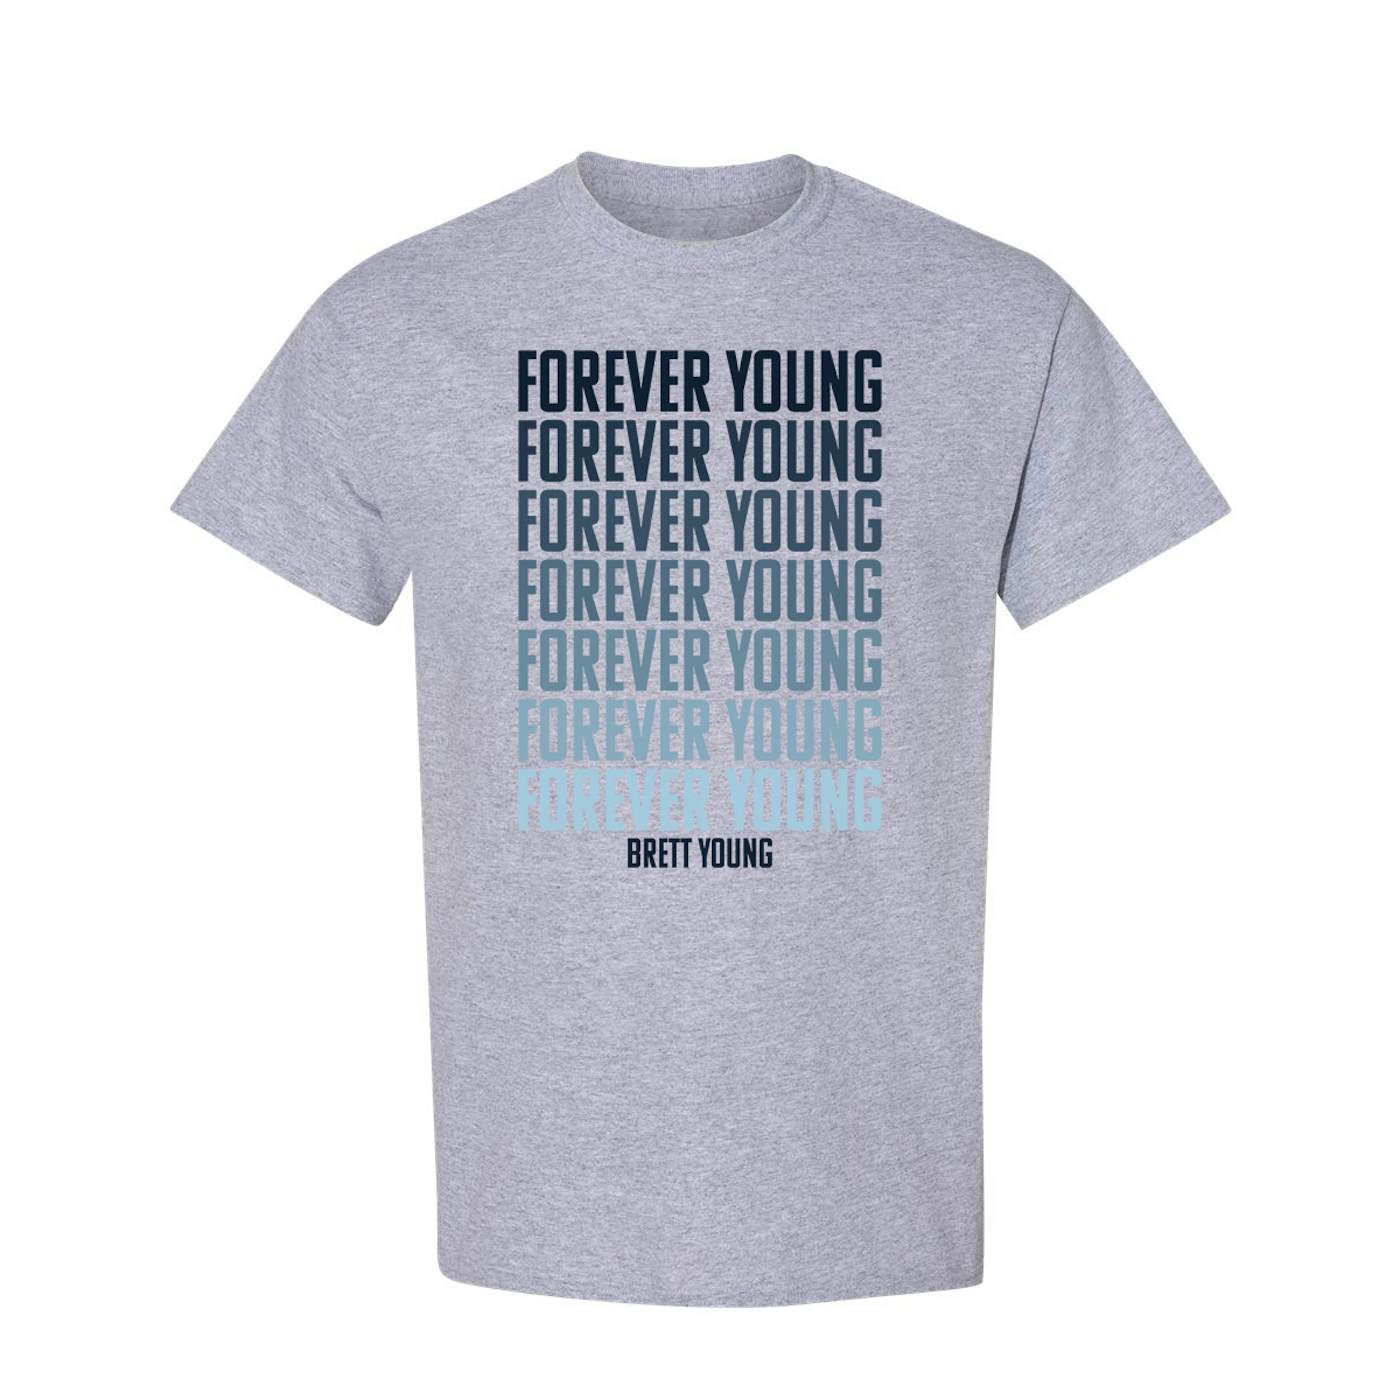 Brett Young Forever Young T-Shirt